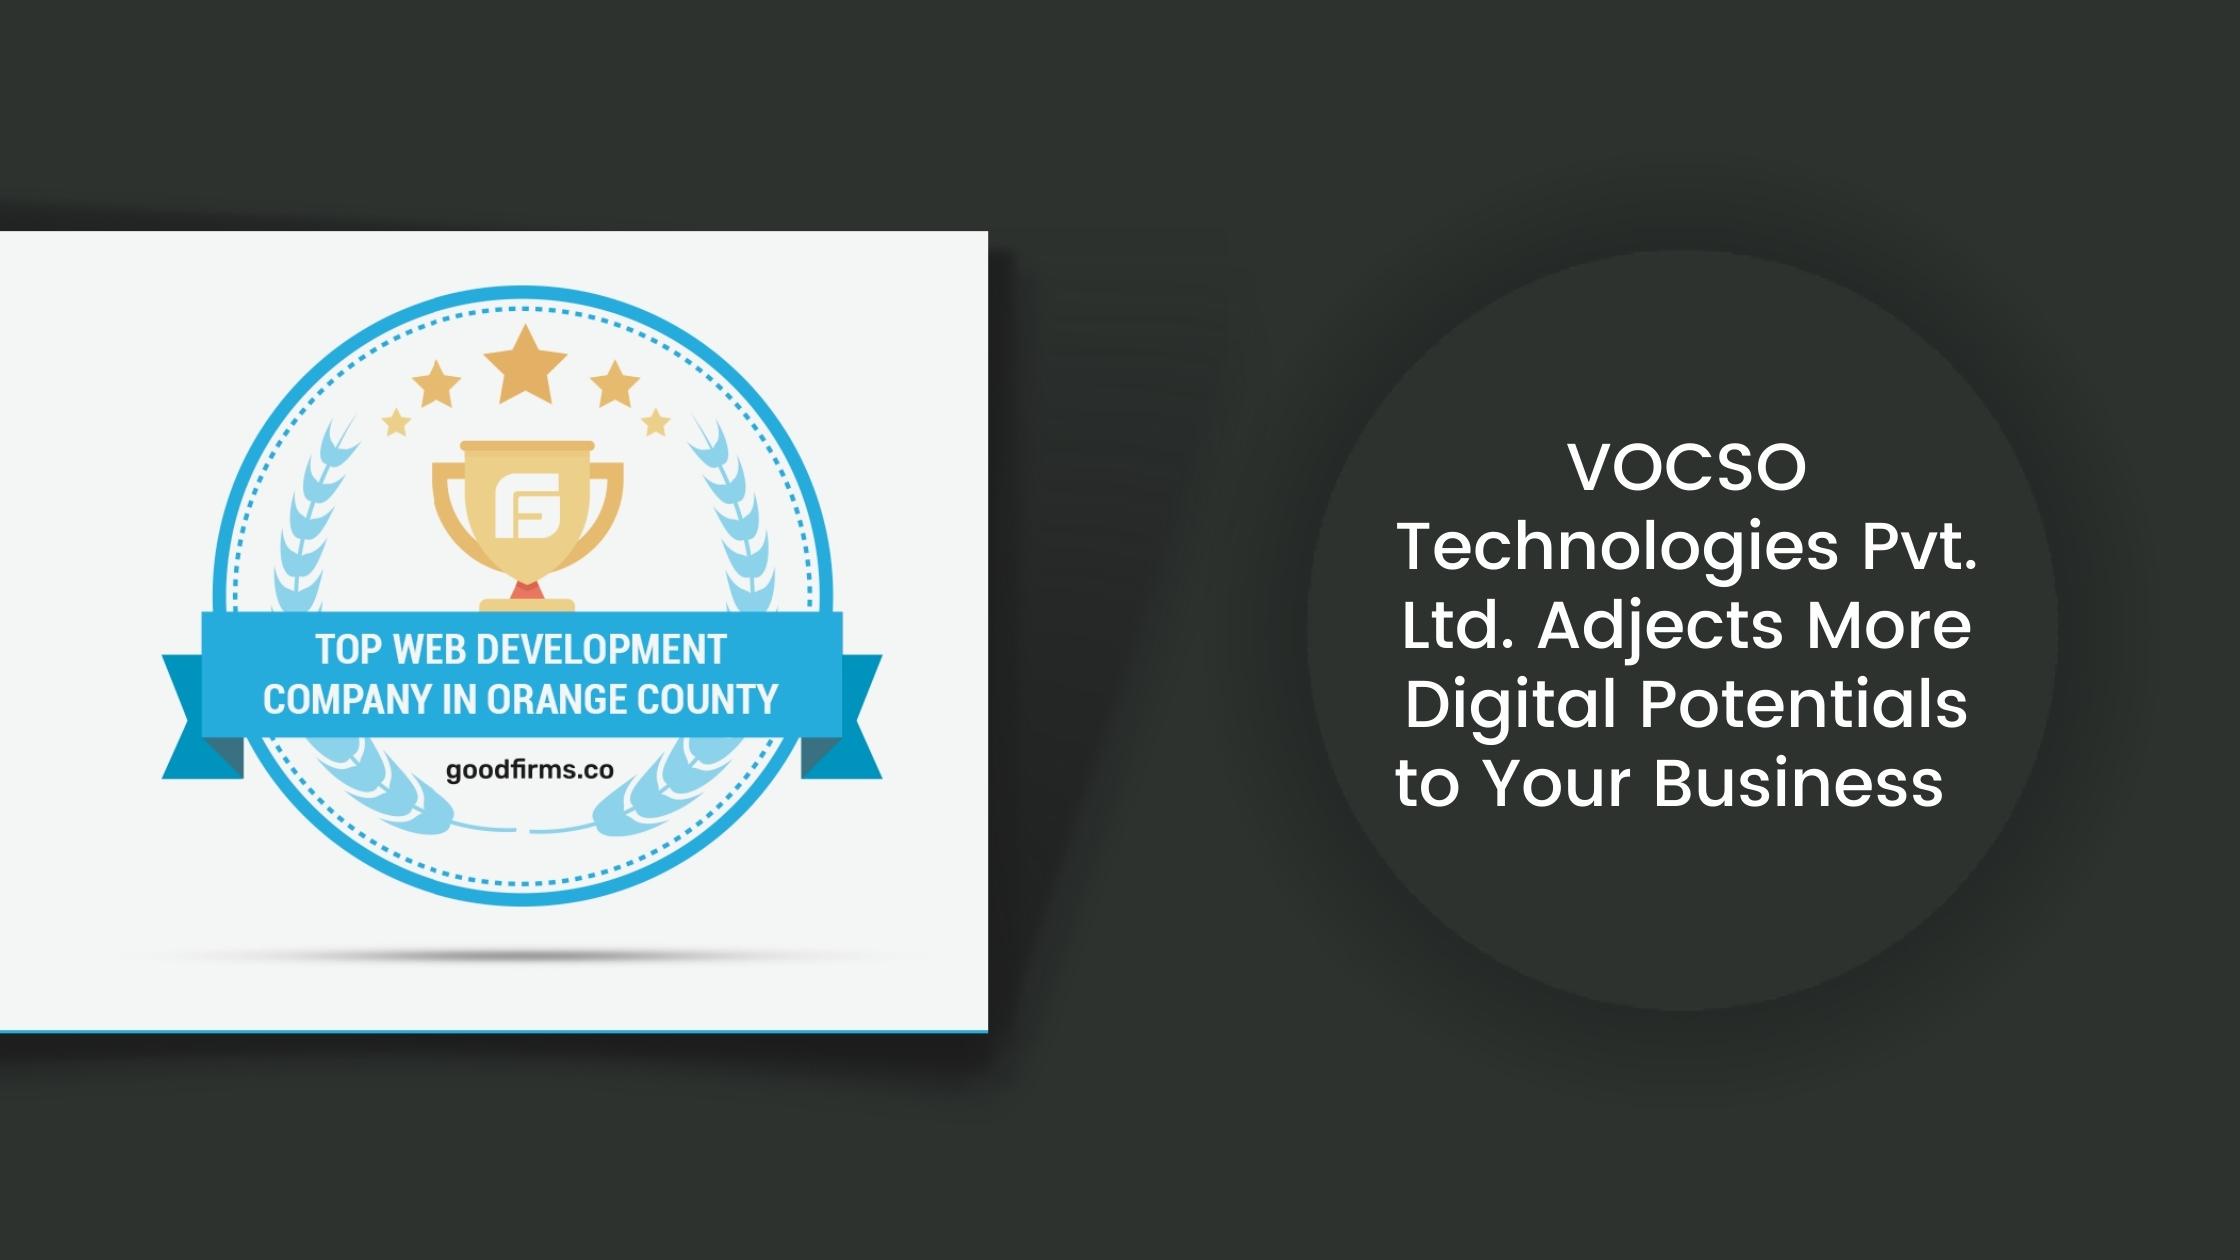 VOCSO Technologies Pvt. Ltd. Adjects More Digital Potentials to Your Business